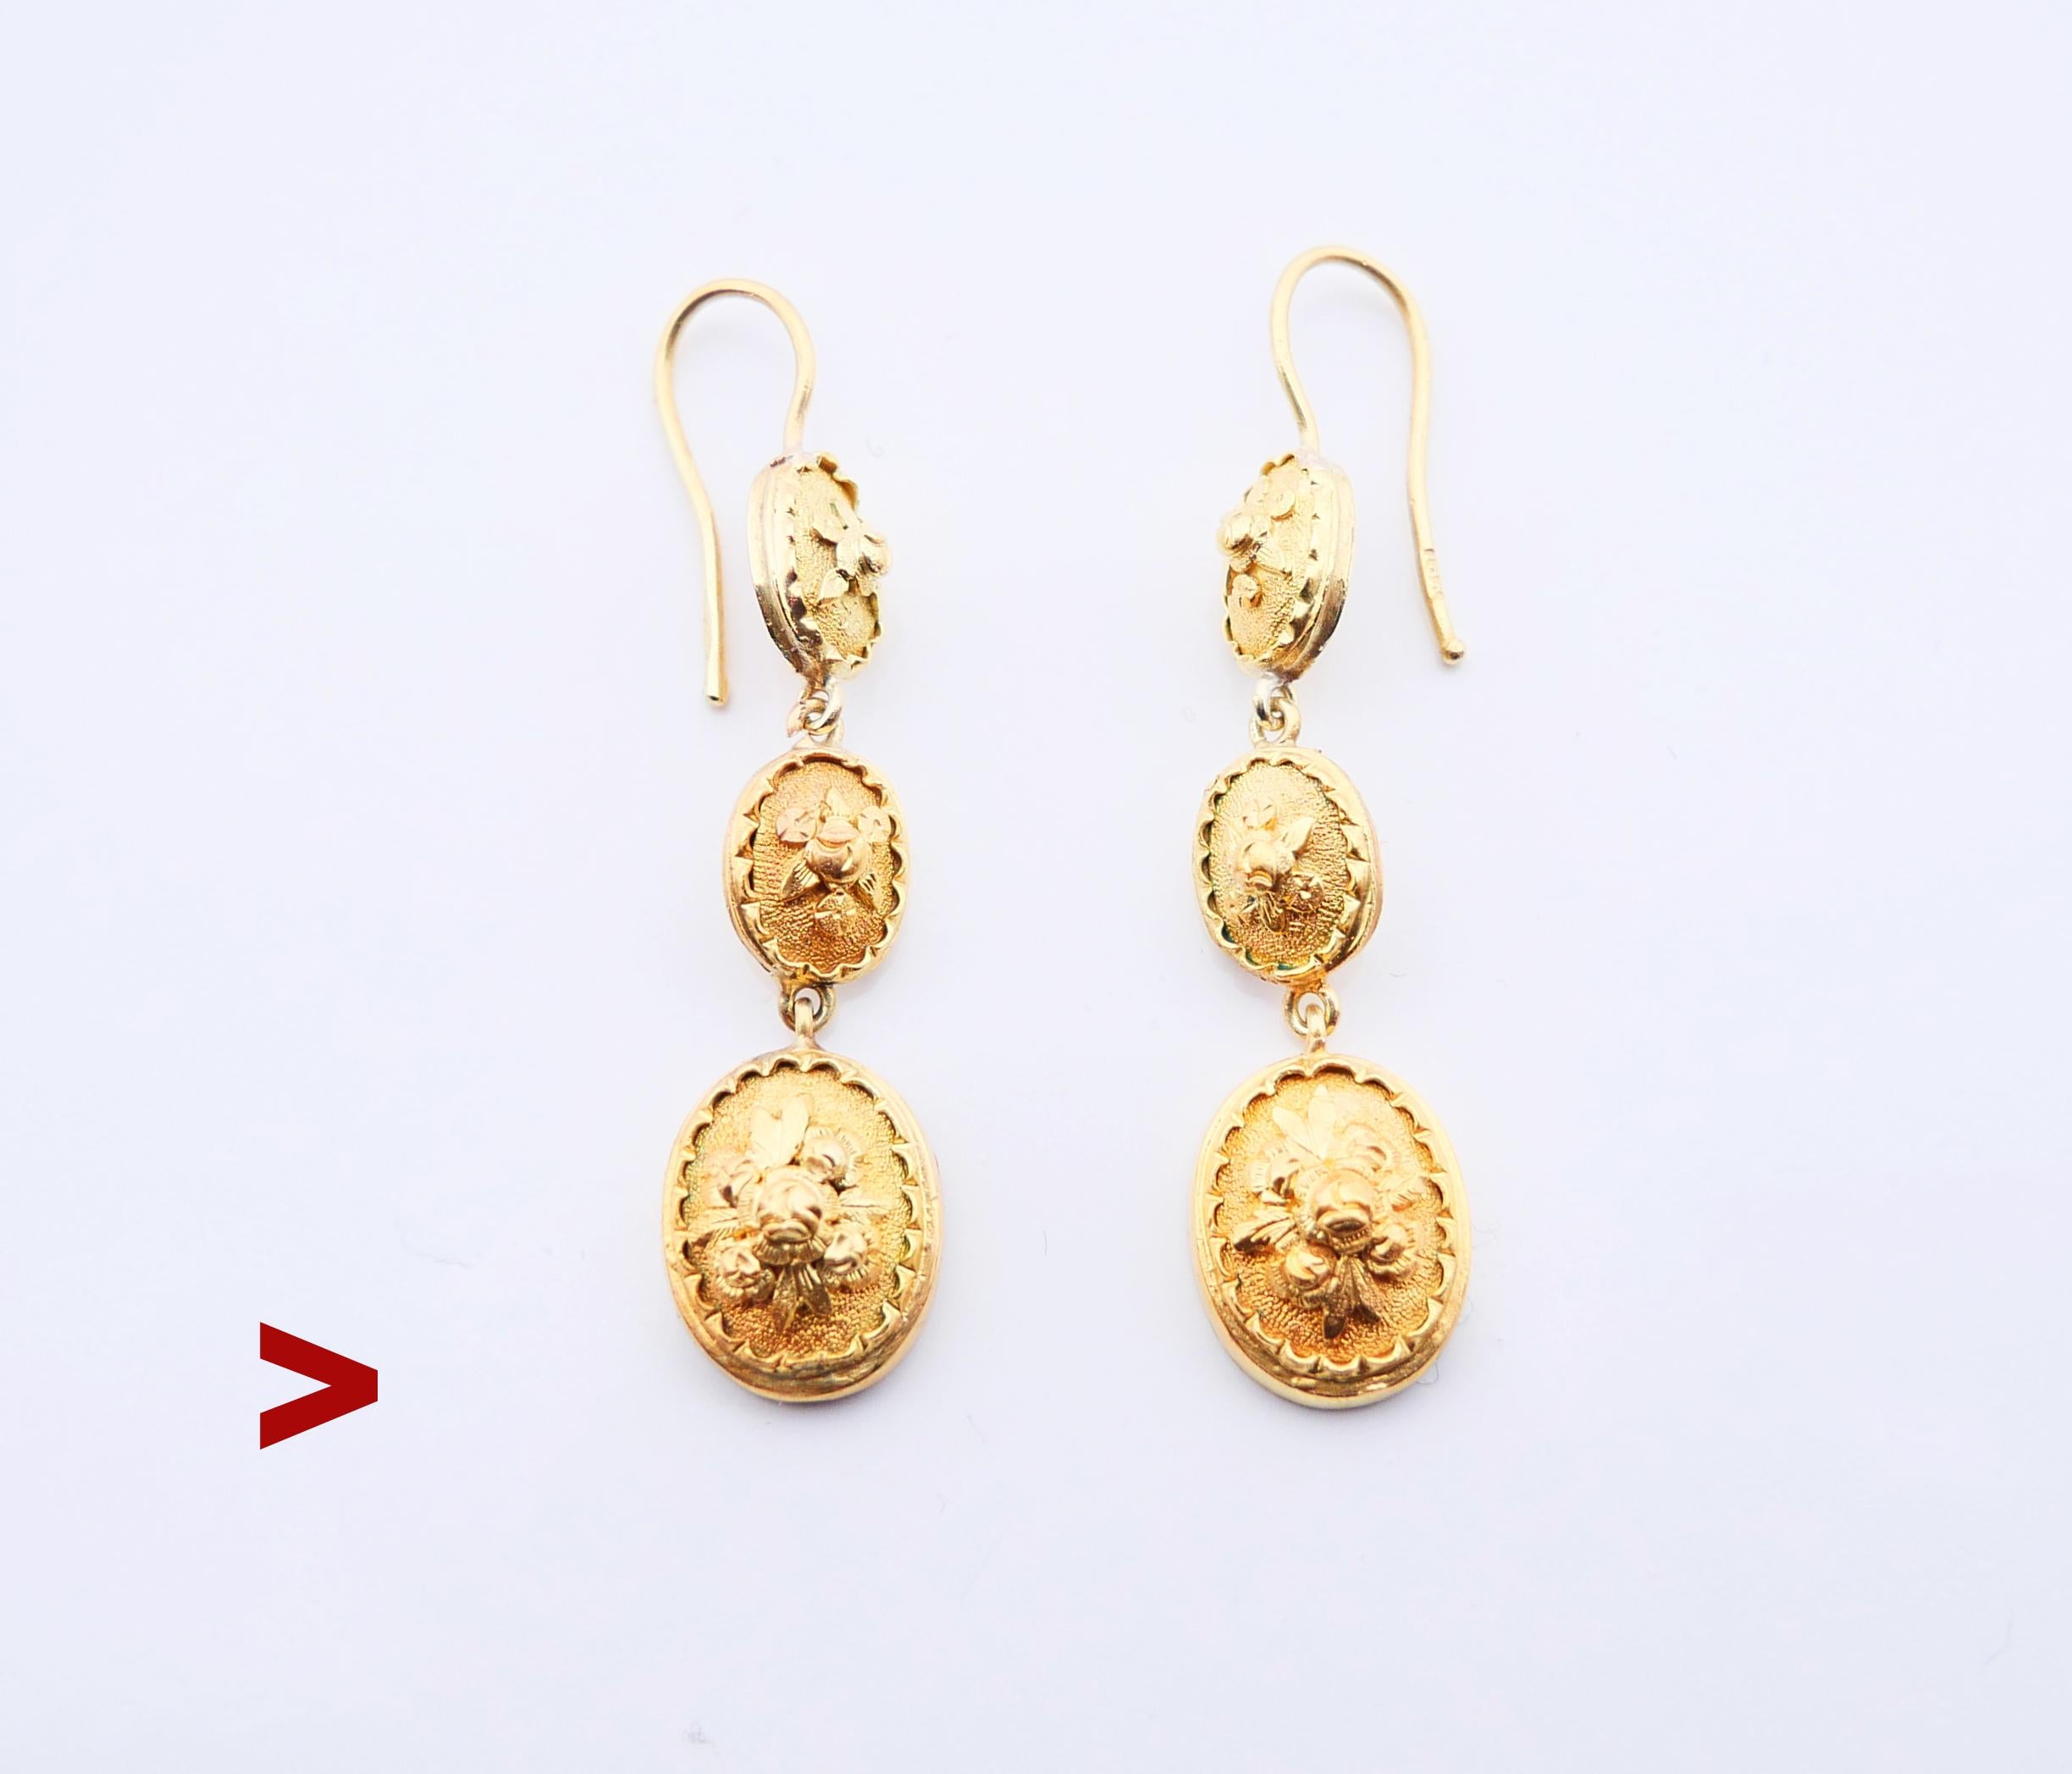 A pair of antique earrings with chained oval medallions of gradual sizes decorated with cast floral ornaments.

Made ca. early 1900s. Hooks hallmarked 18K , metal tested solid 18K Yellow Gold.

Each earring is 47 mm long suspended. Oval dangles are